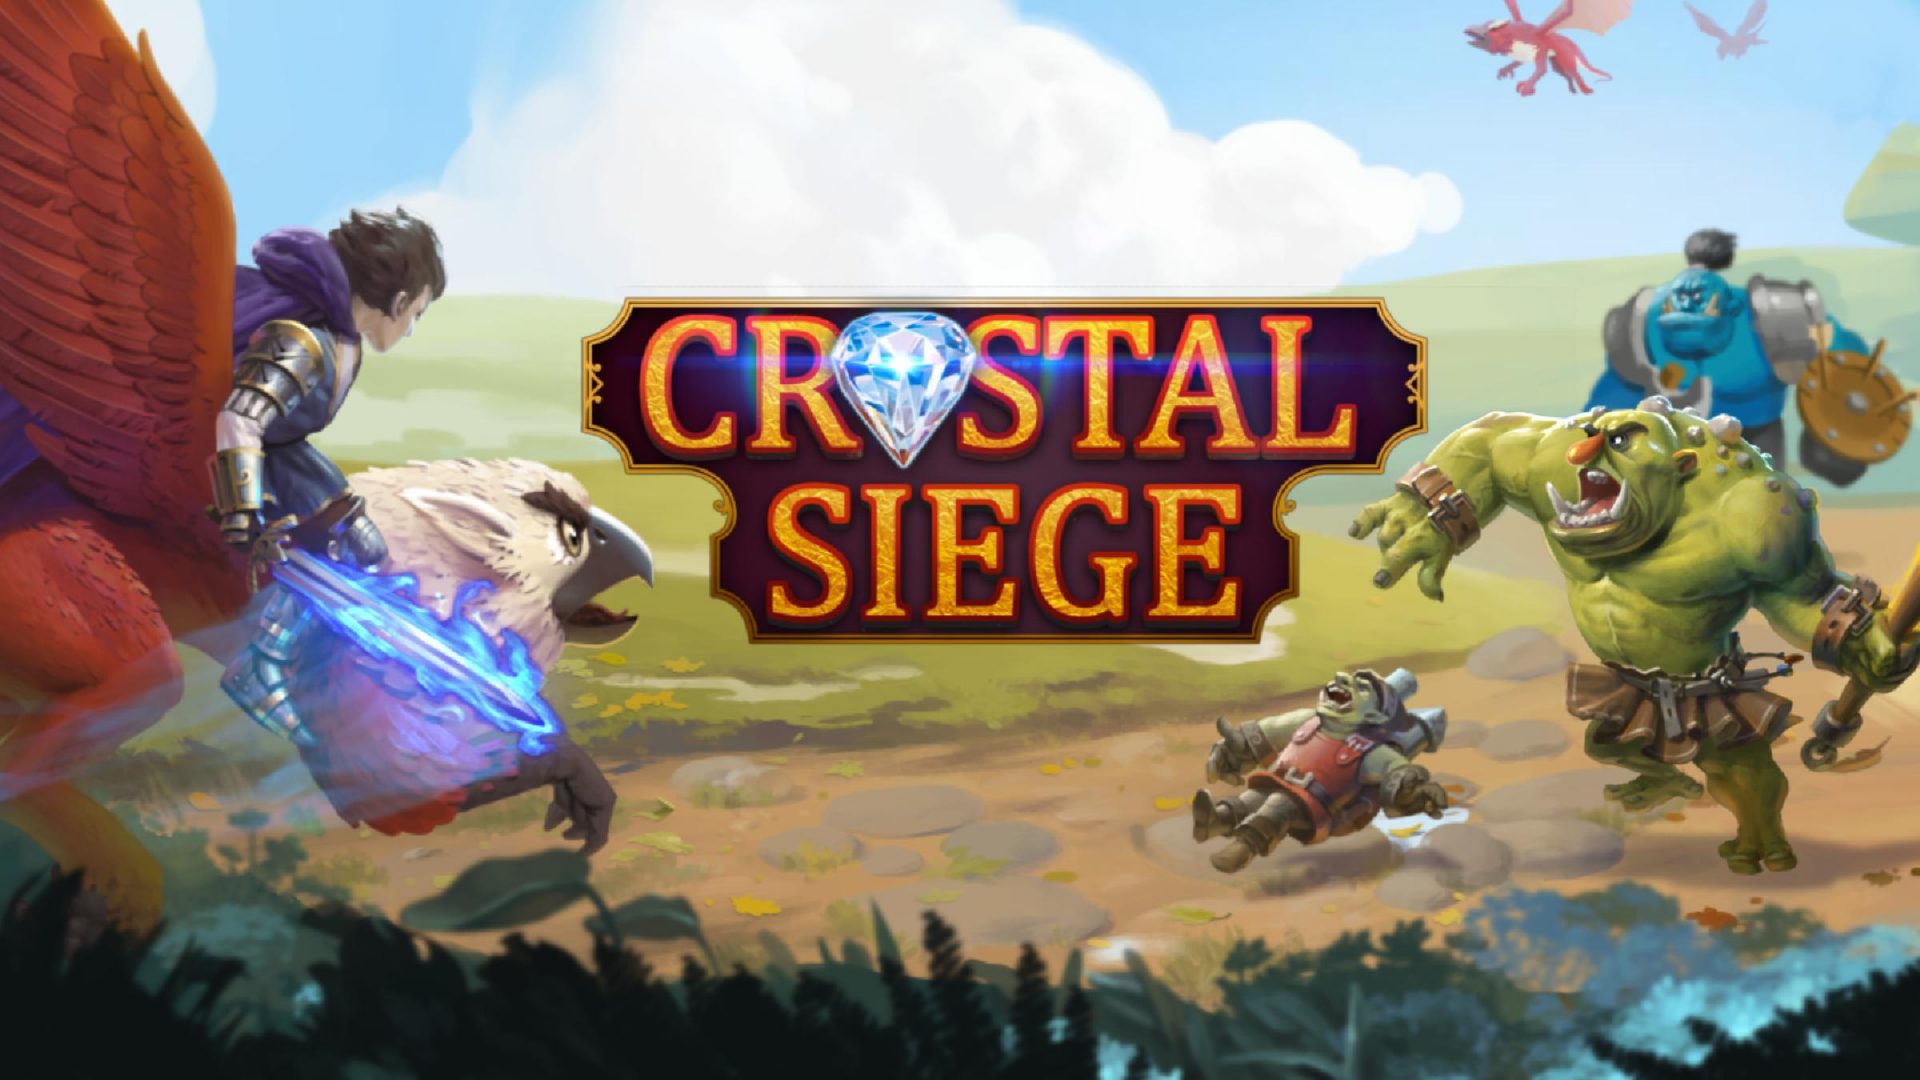 Crystal Defense Mobile Android Full WORKING Game Mod APK Free Download 2019